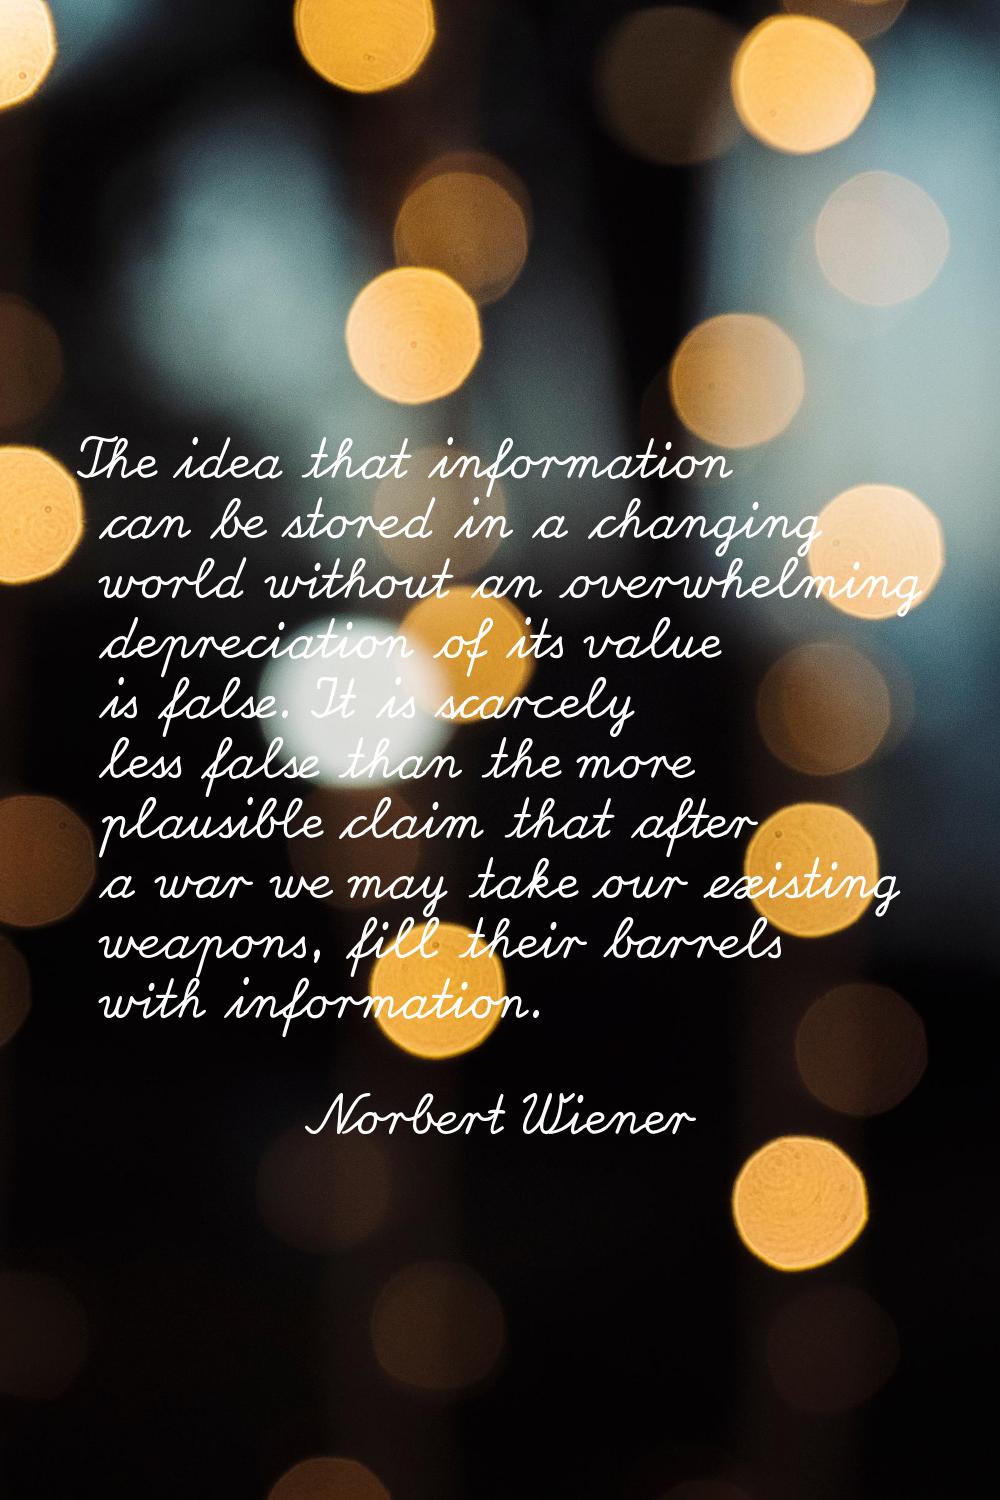 The idea that information can be stored in a changing world without an overwhelming depreciation of